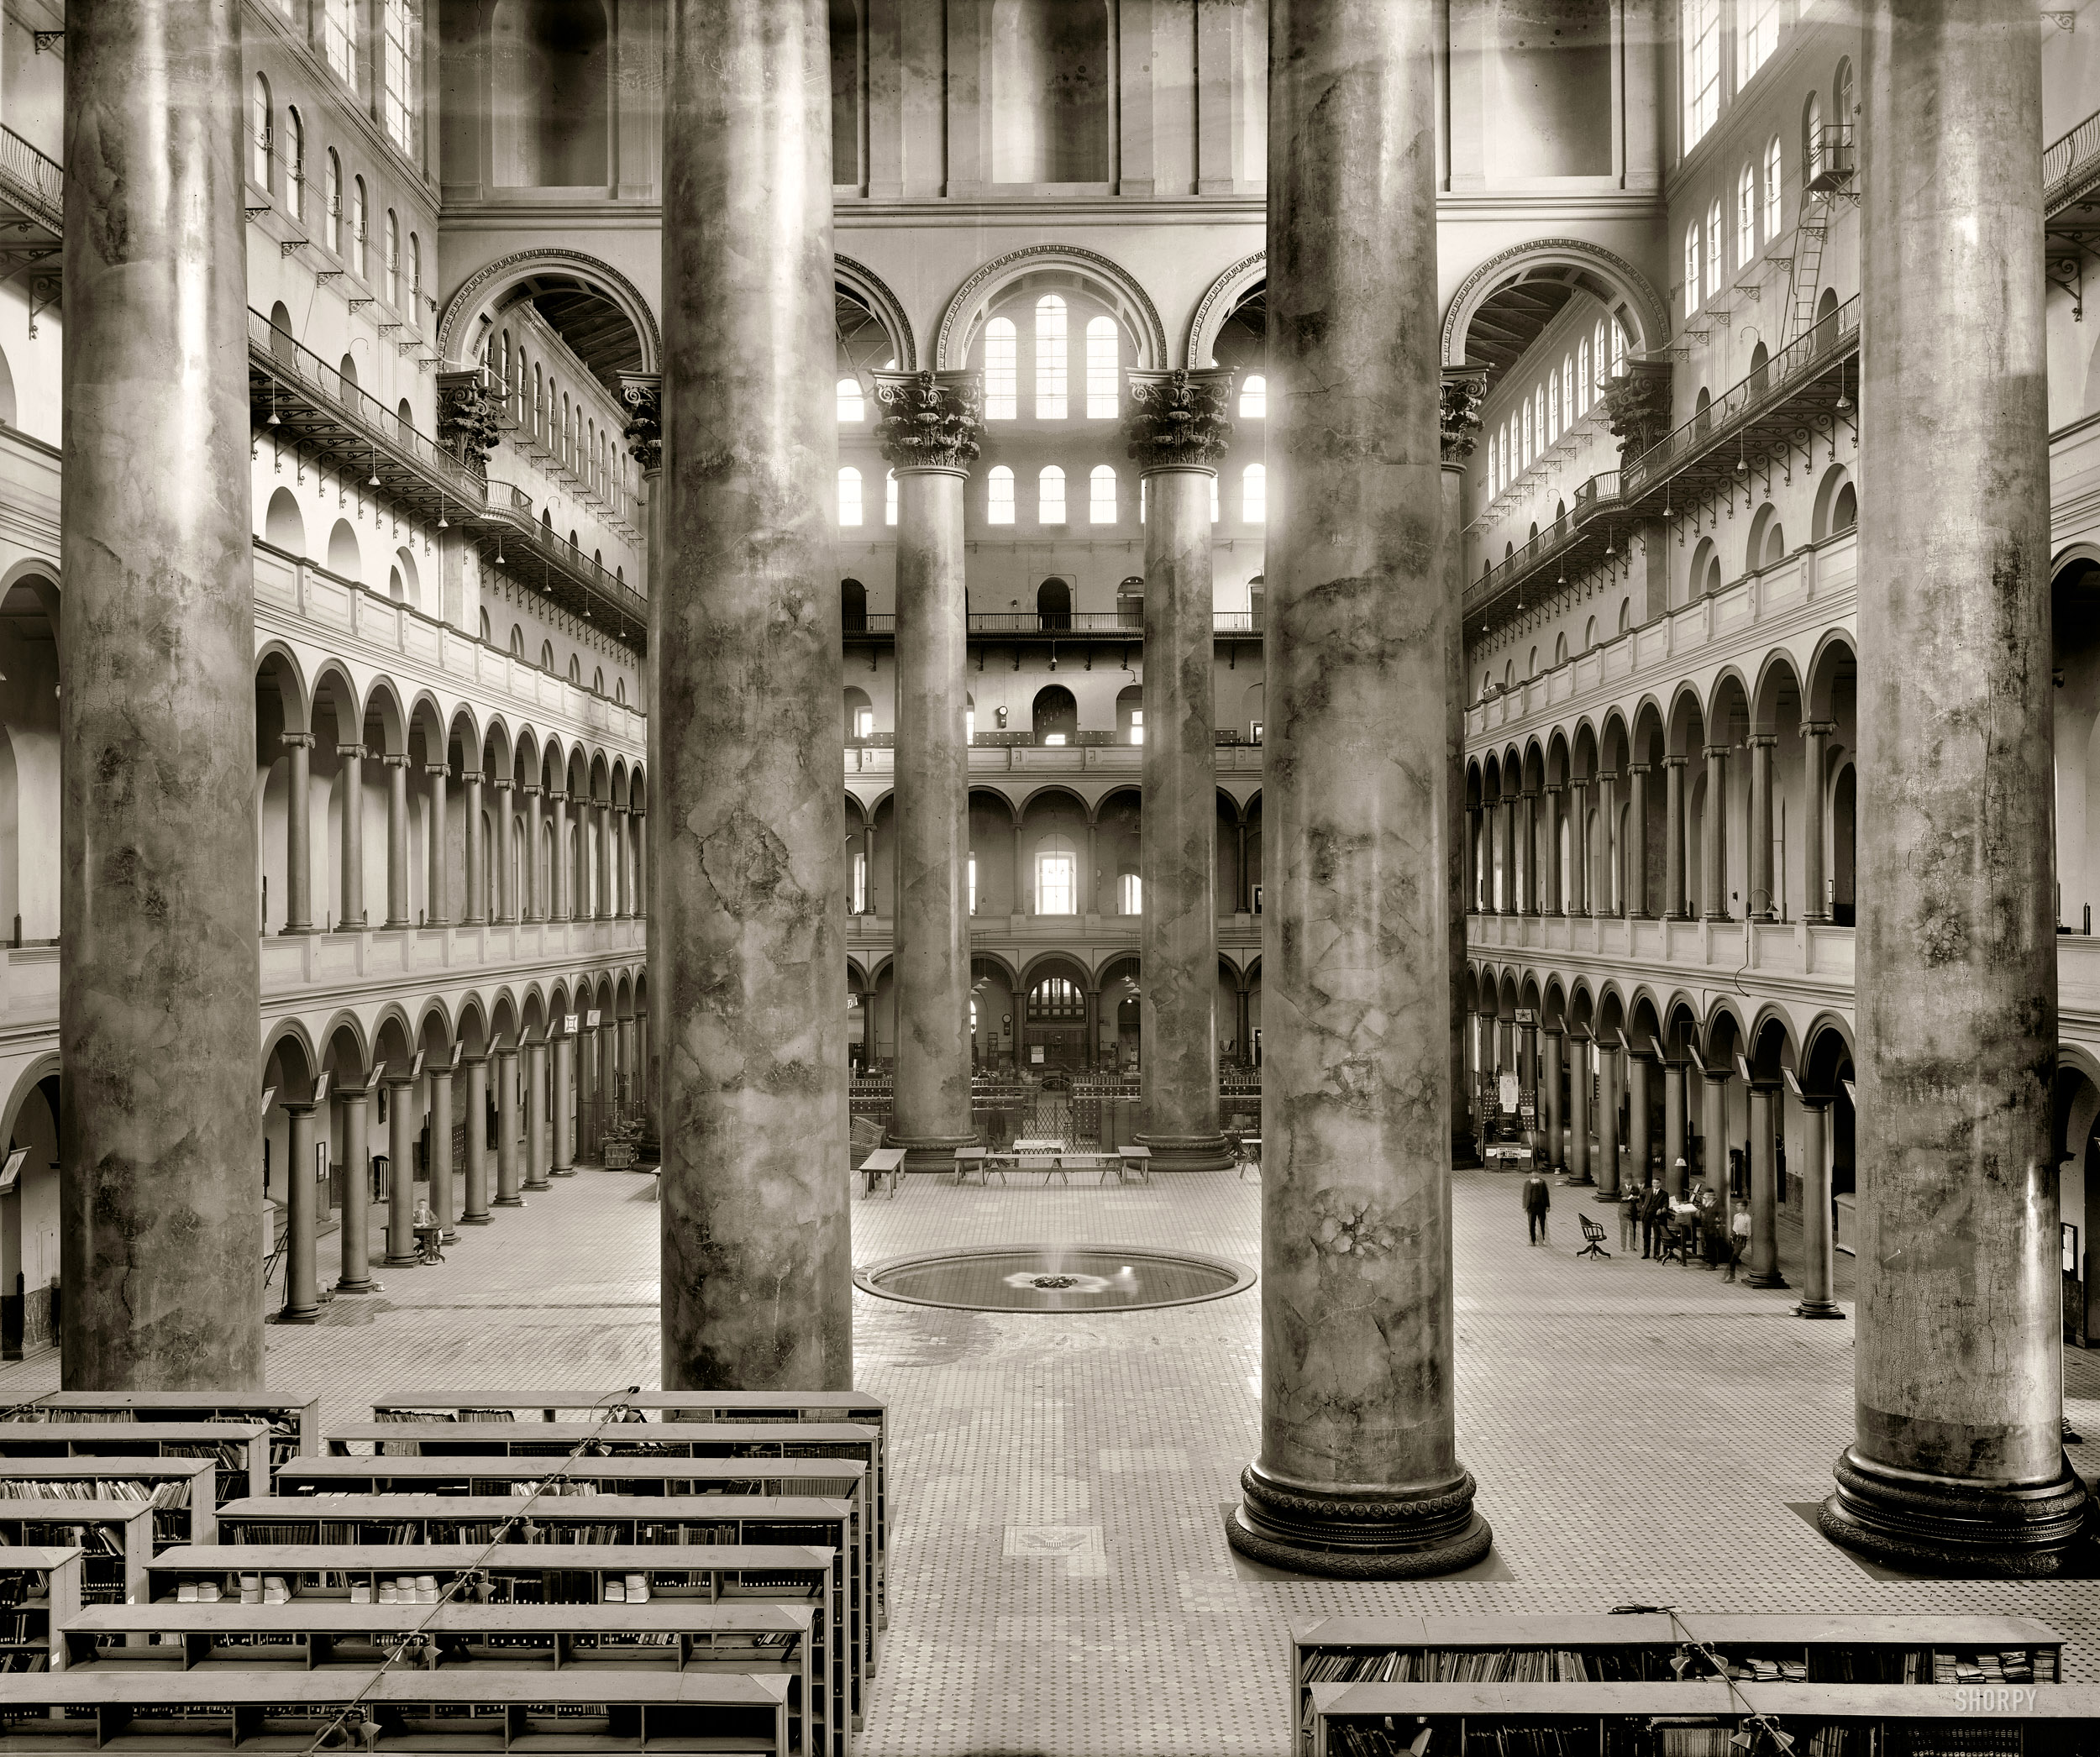 Washington, D.C., circa 1918. "Pension Office interior." This former repository of Civil War veterans' pension records is now the National Building Museum. National Photo Company Collection glass negative. View full size.